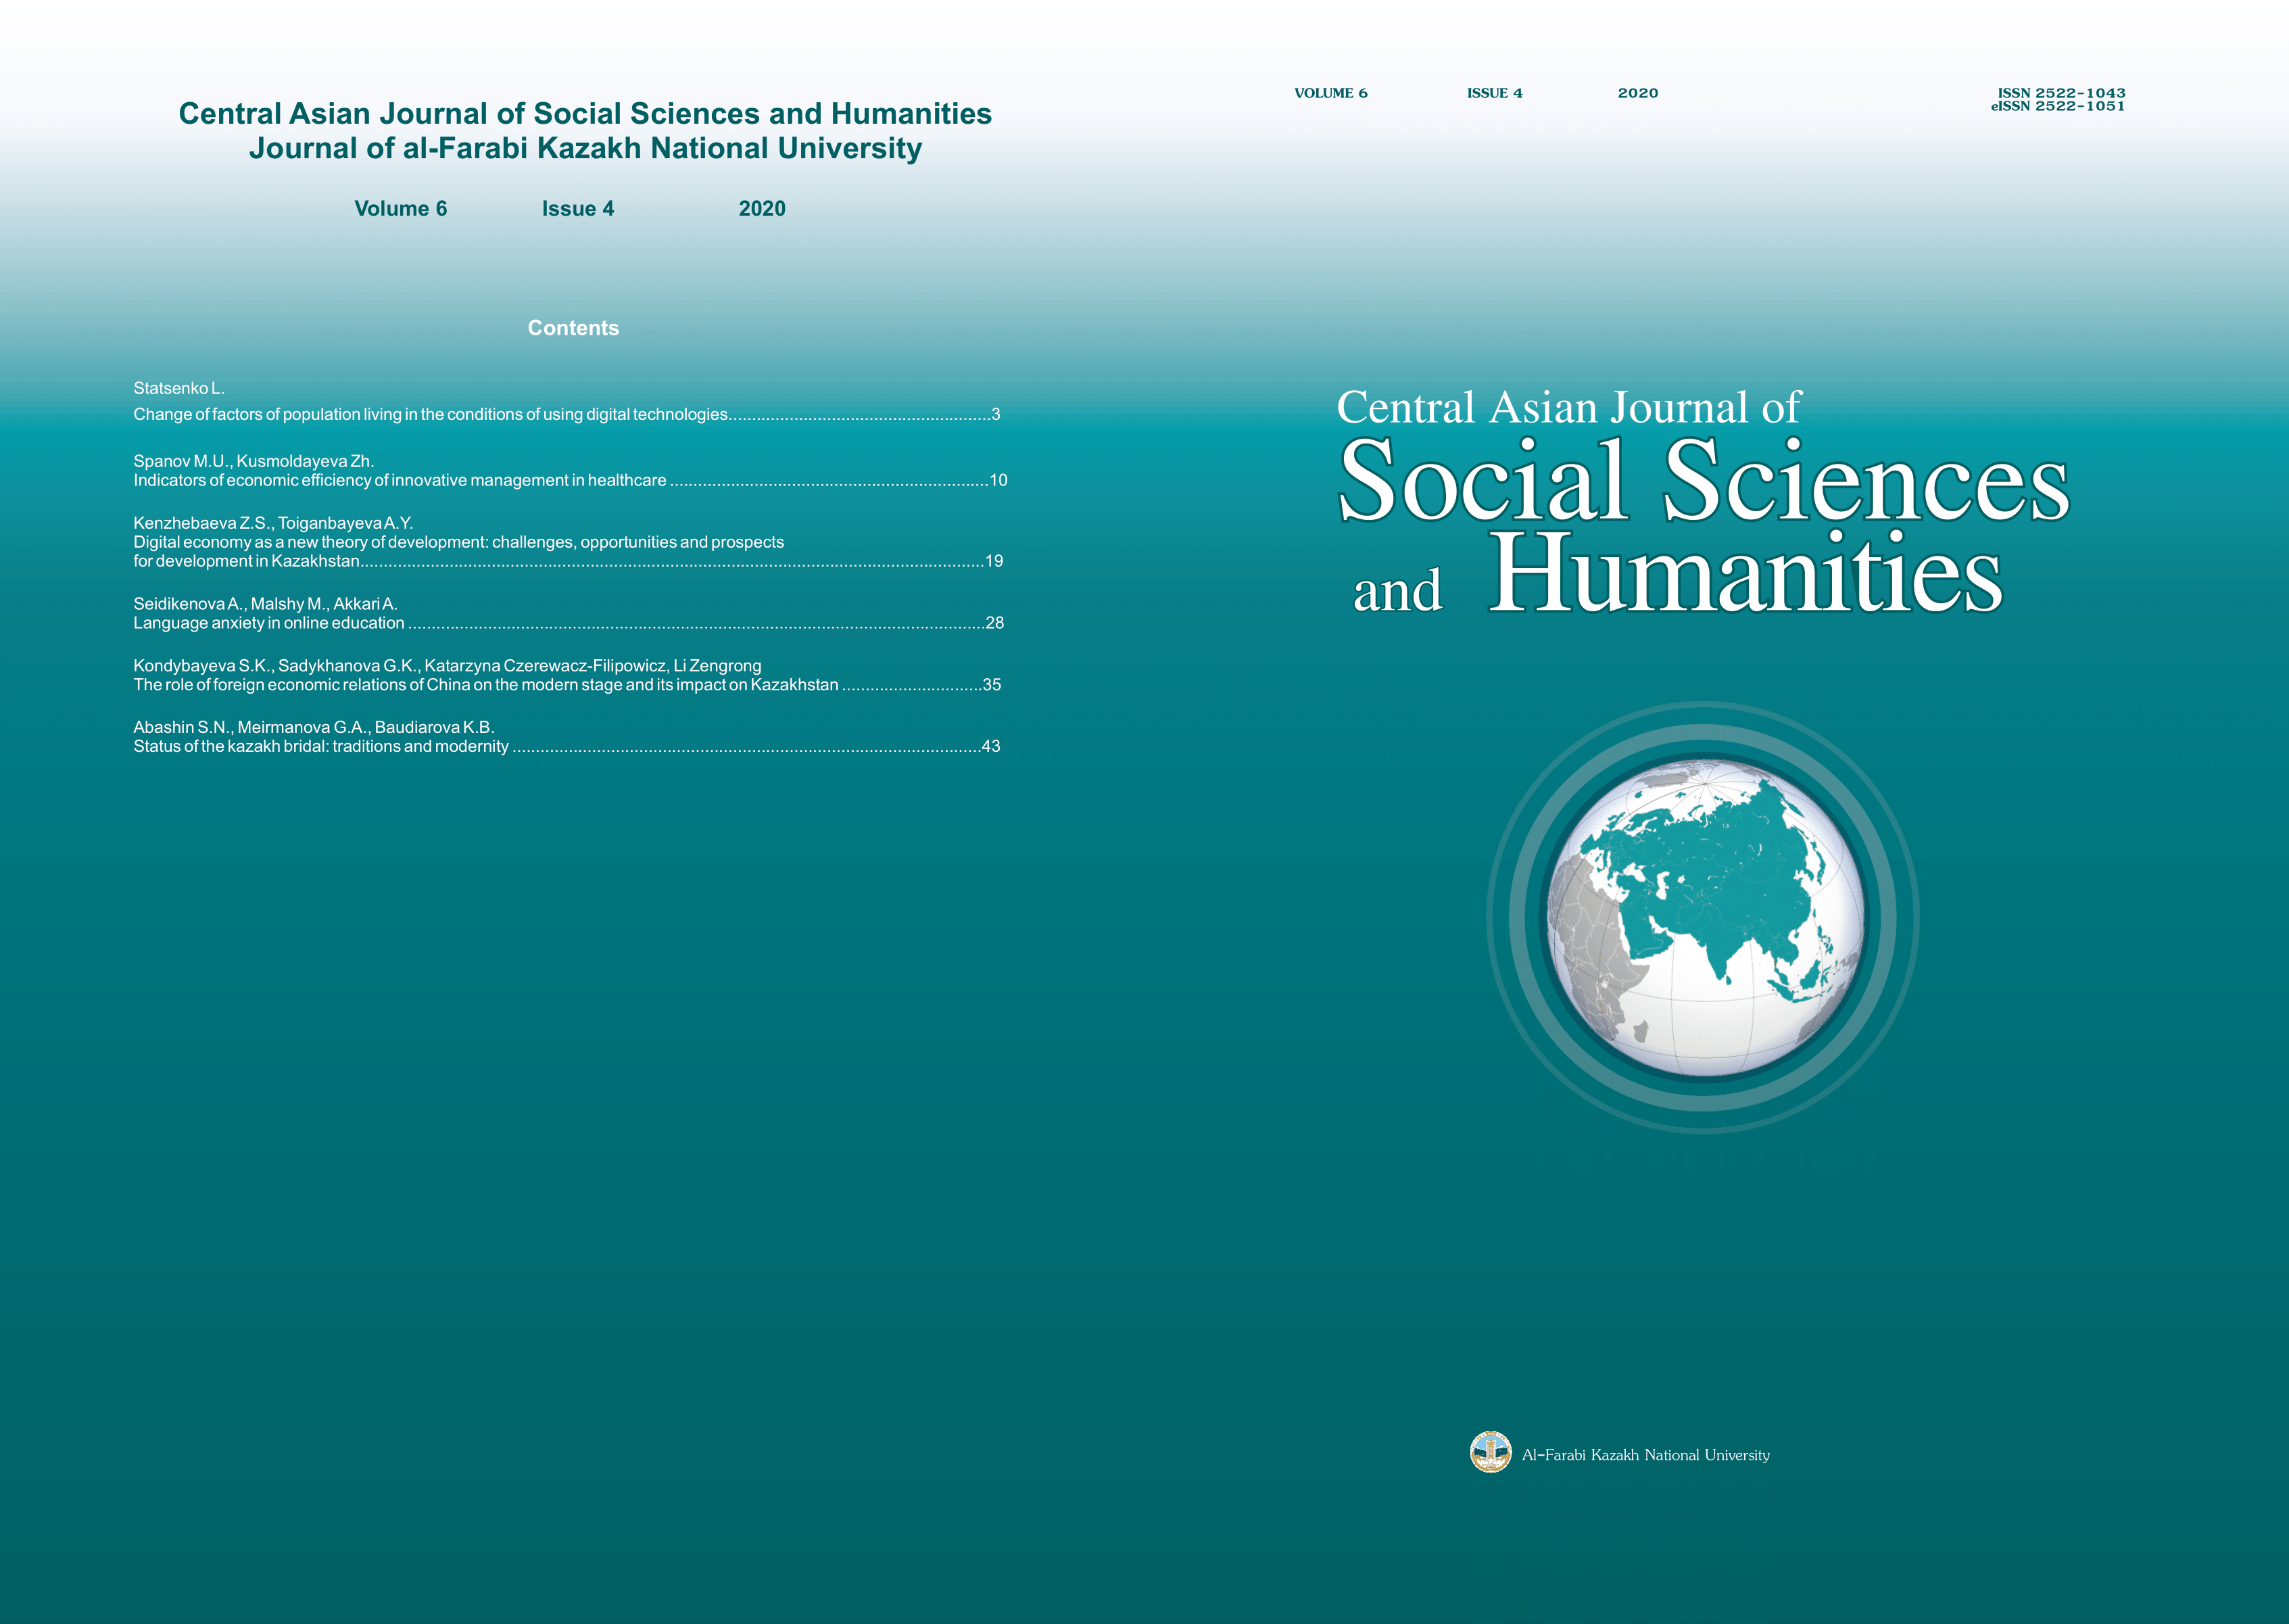 					View Vol. 6 No. 4 (2020): Central Asian Journal of Social Sciences and Humanities Journal of al-Farabi Kazakh National University
				